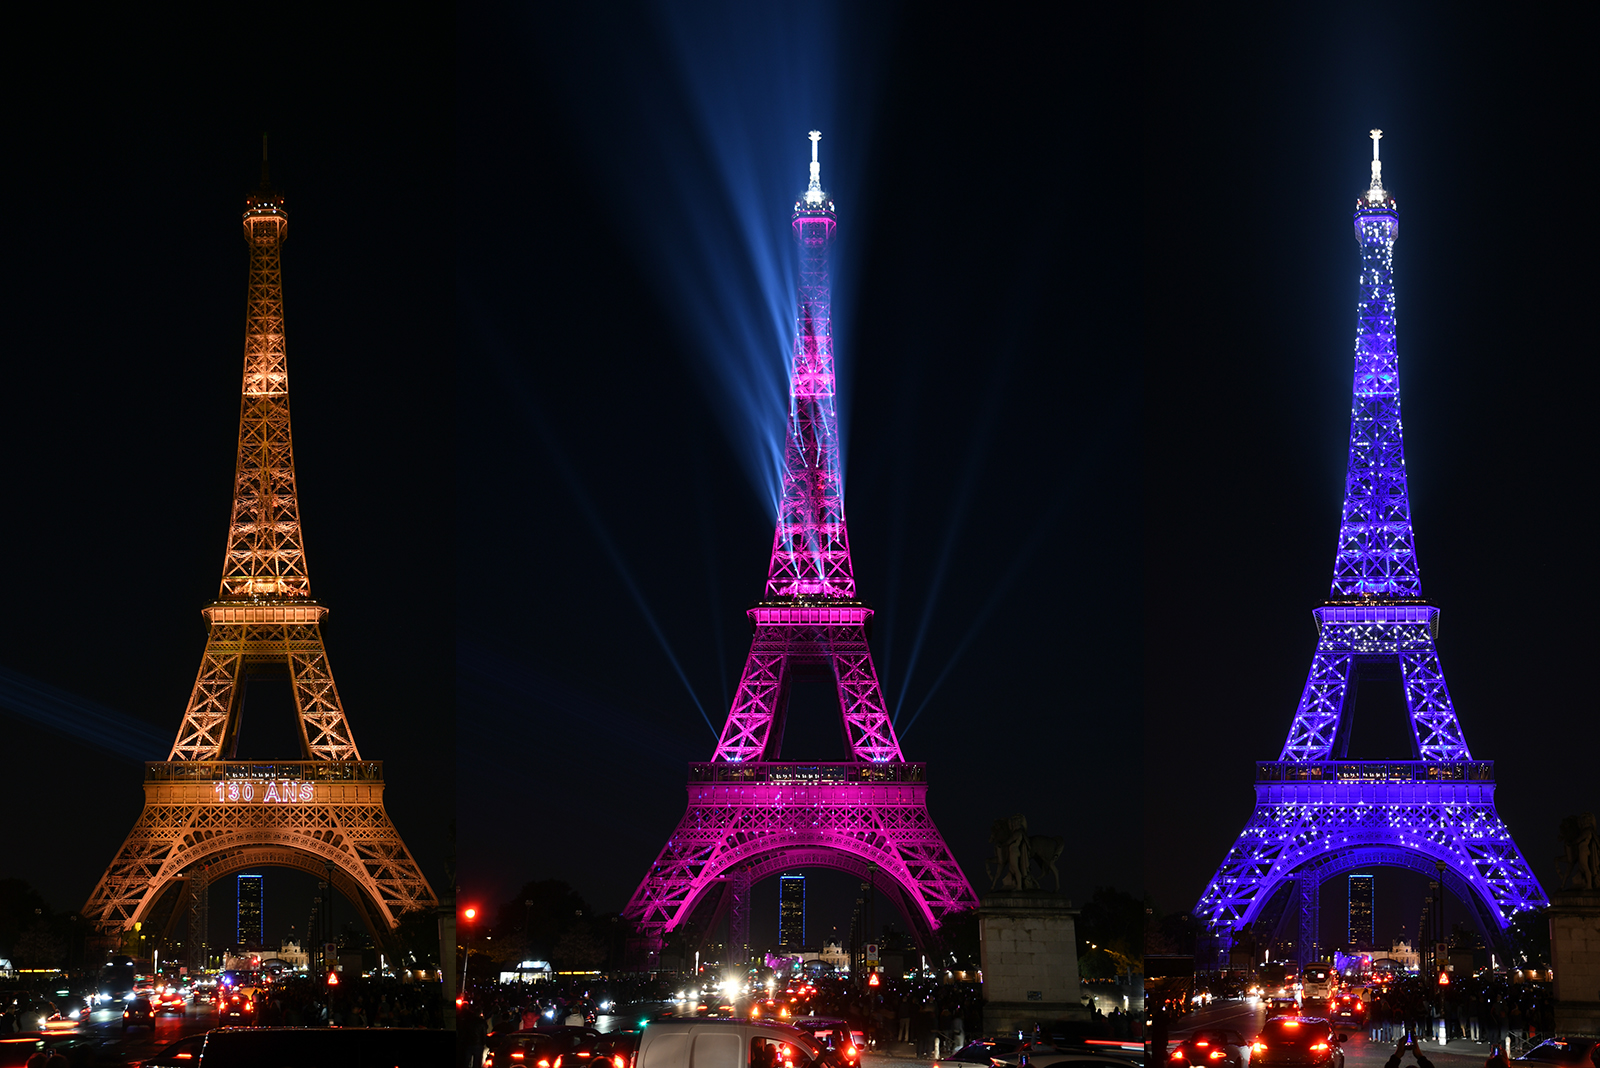 The Eiffel Tower's light show ushers in the year 2022: